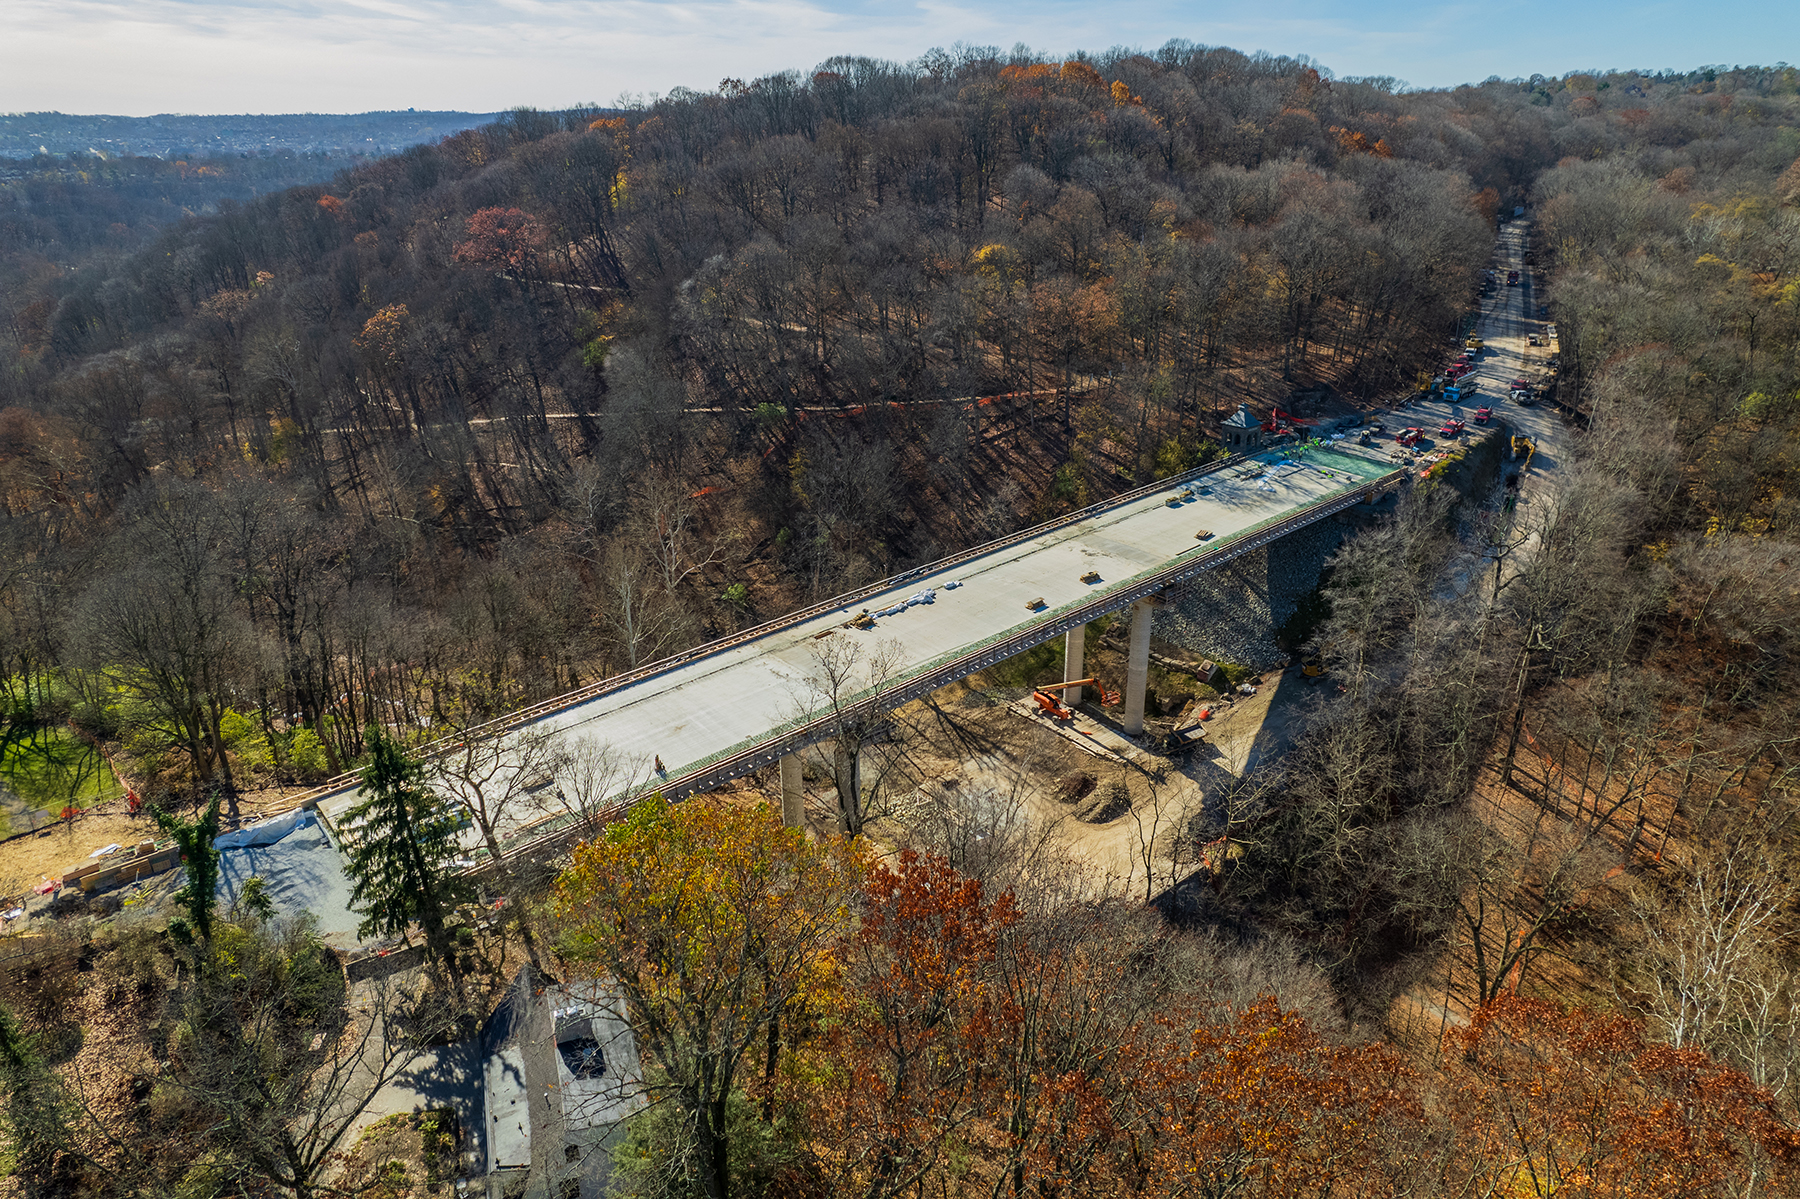 By early November, less than nine months after the collapse of the original span, the concrete deck had been completed on the new Fern Hollow Bridge.  (Image courtesy Swank Construction Co. LLC)